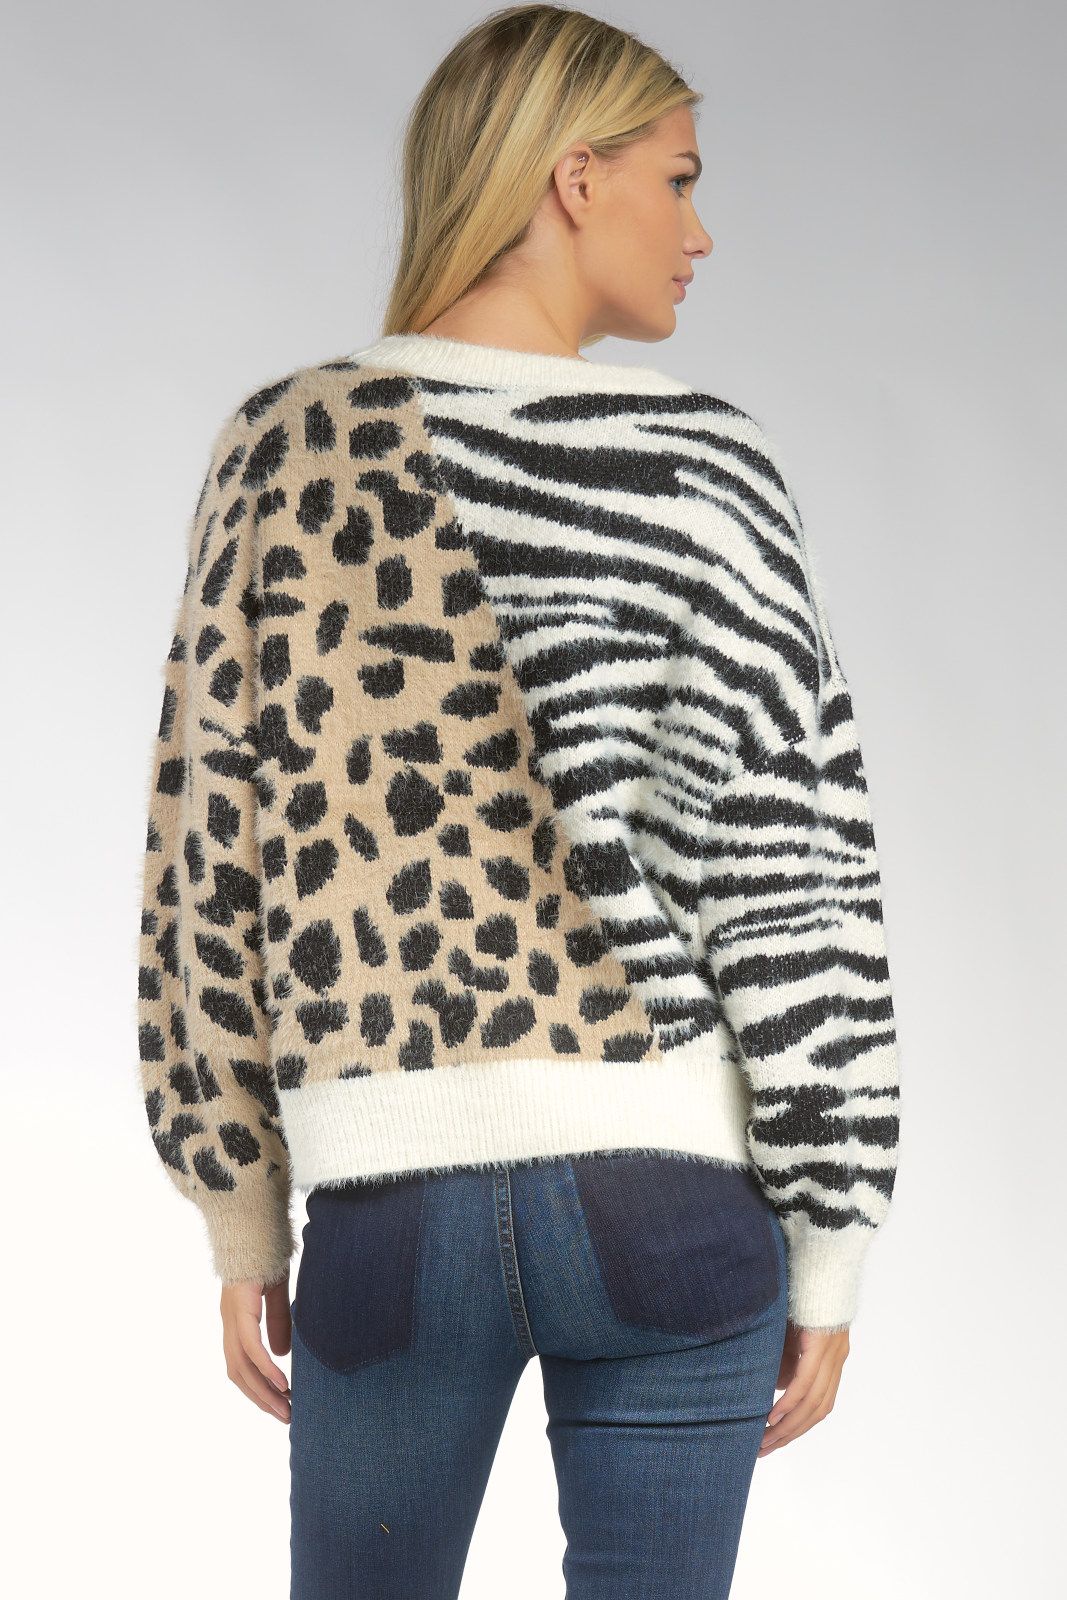 Mixed Animal Print Sweater | Taupe Black - Main Image Number 2 of 2